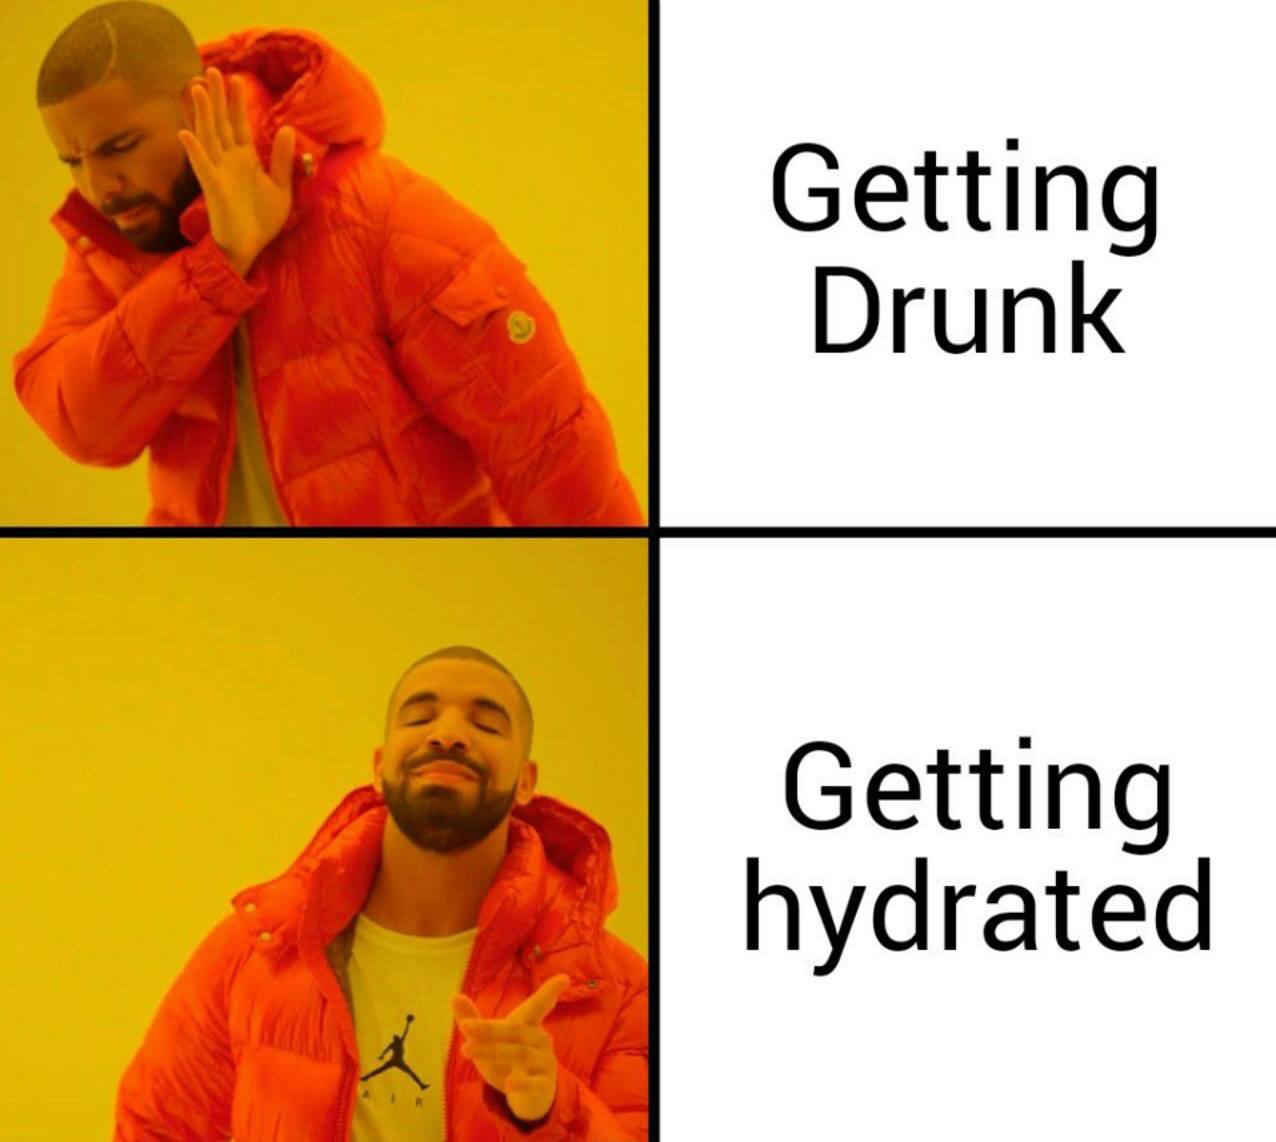 wholesome memes - Getting Drunk Getting hydrated